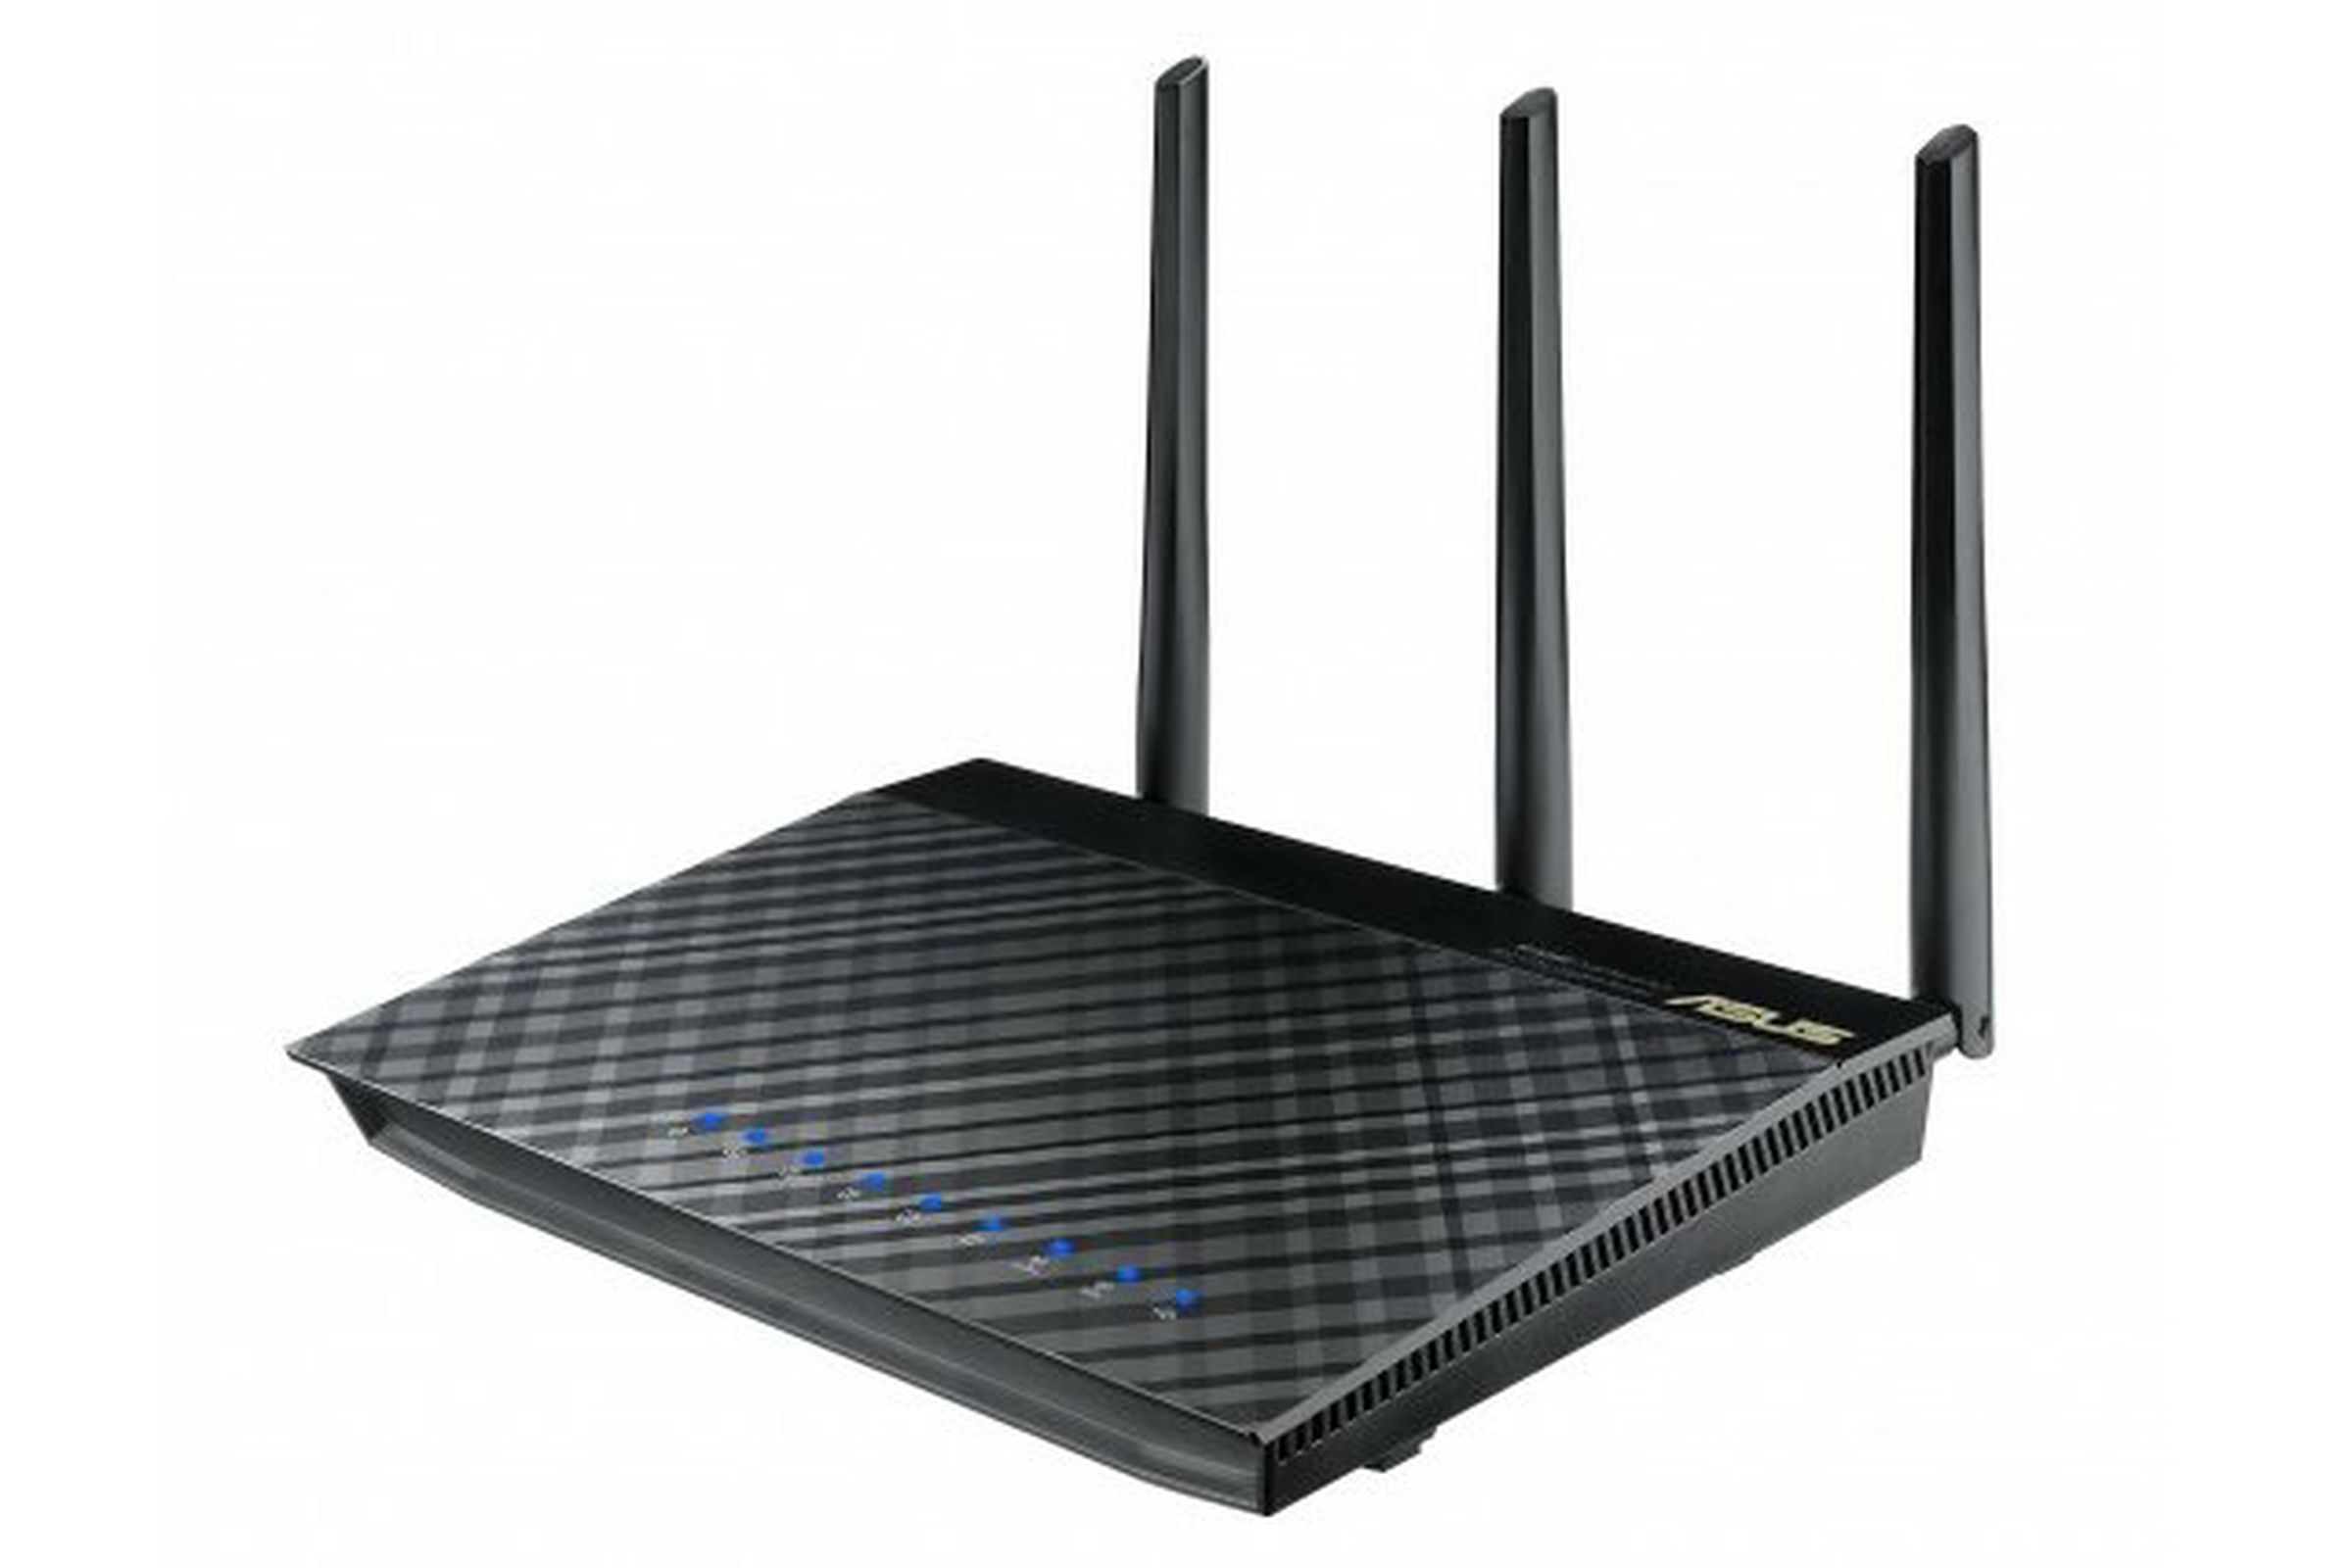 ASUS RT-AC66U AiCloud Router s